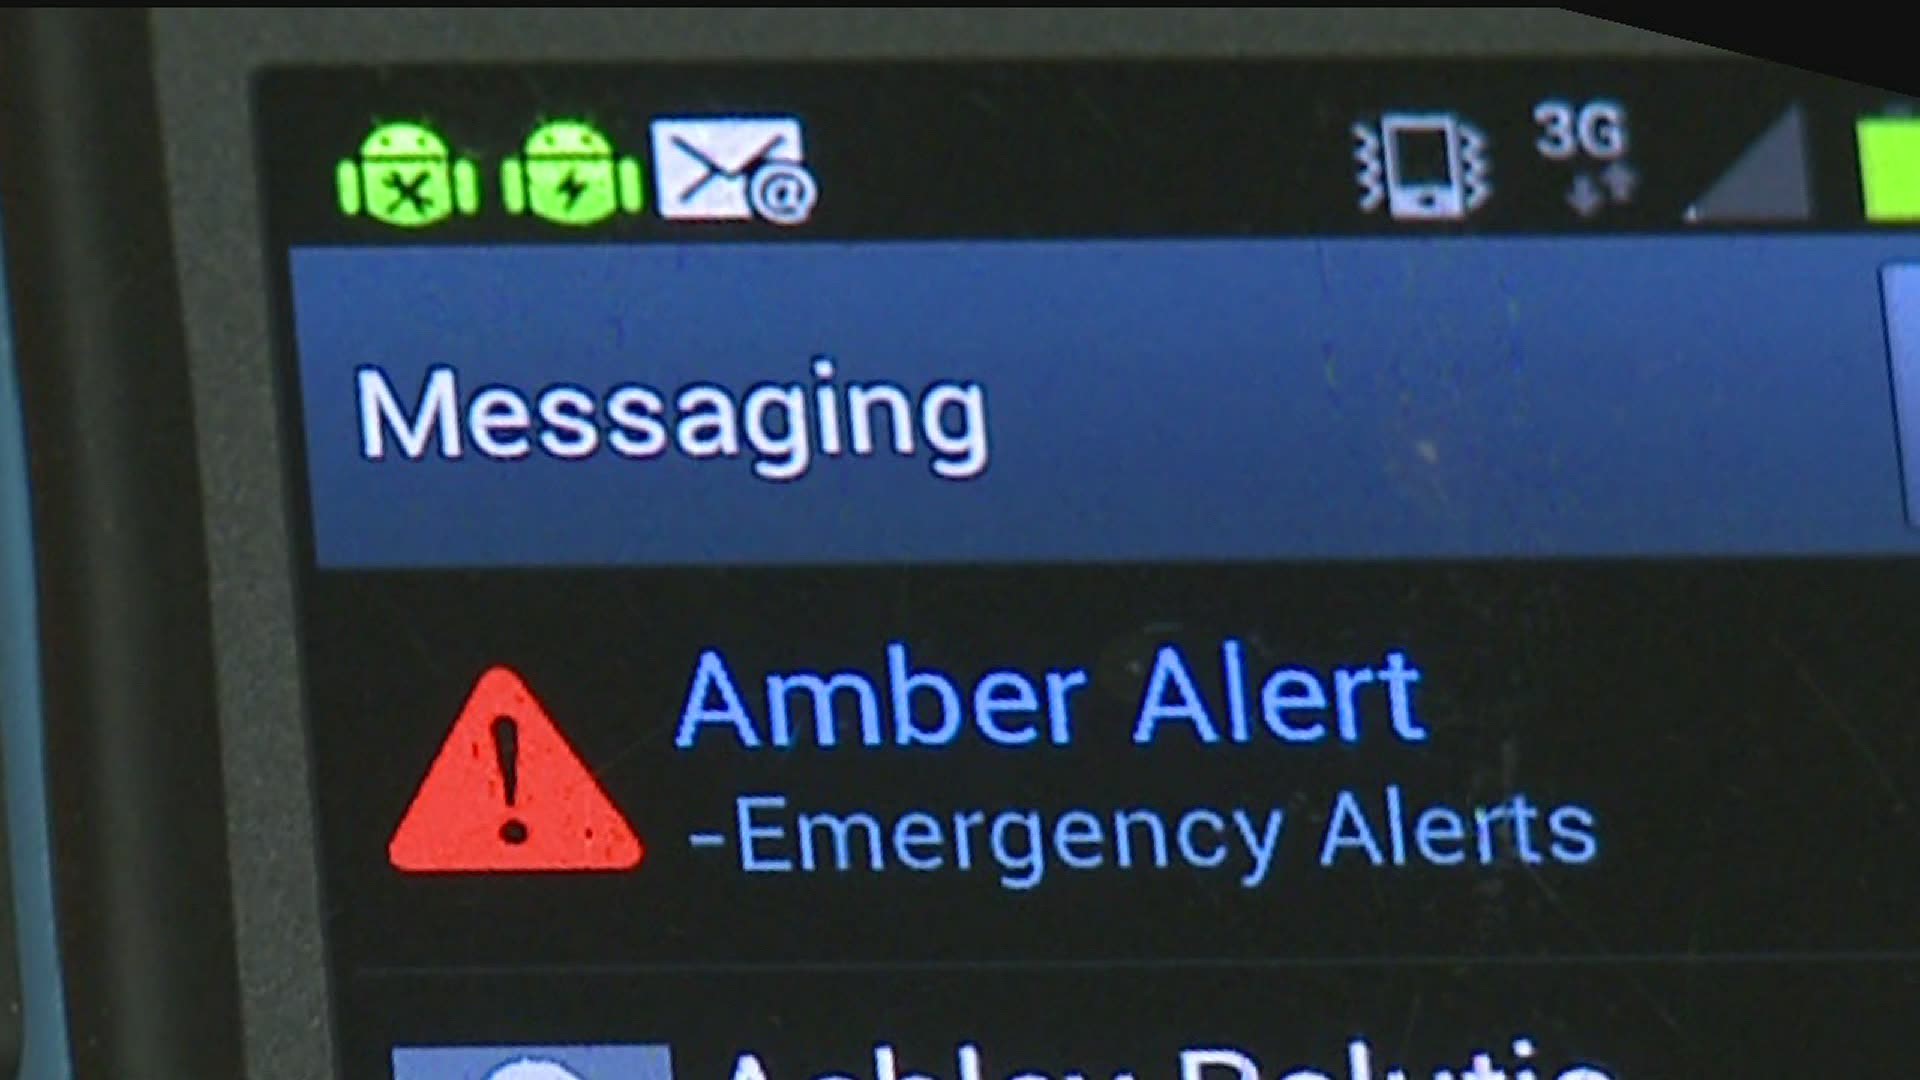 AMBER Alerts have contributed to the recovery of more than 1,100 children in the U.S. according to the Dept. of Justice.